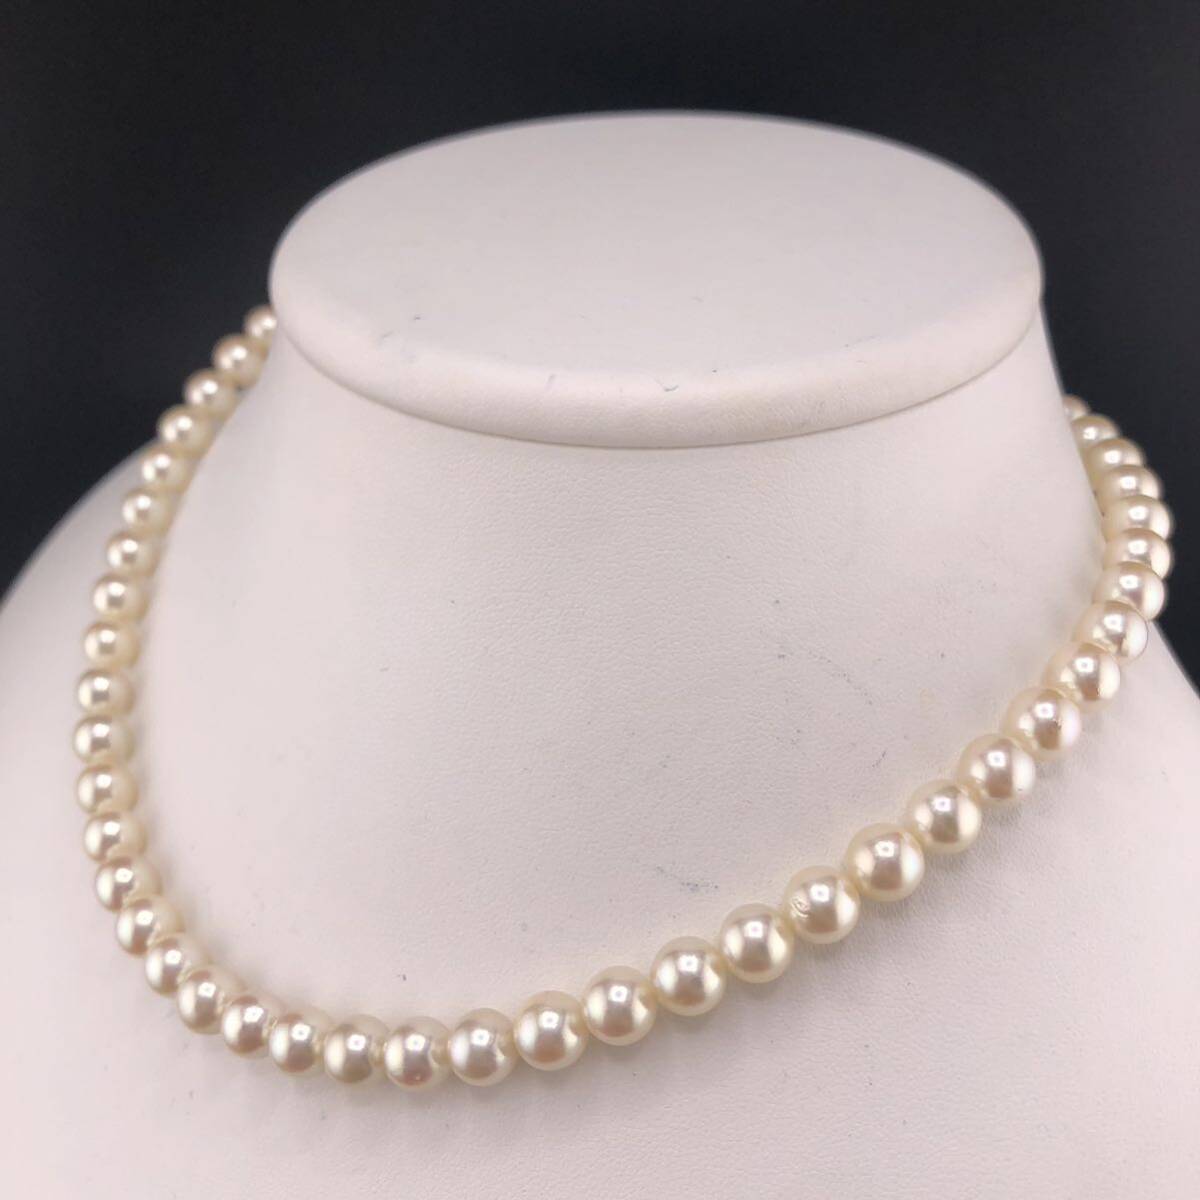 E05-1257 アコヤパールネックレス 7.0mm~7.5mm 40cm 32.2g ( アコヤ真珠 Pearl necklace SILVER )の画像2